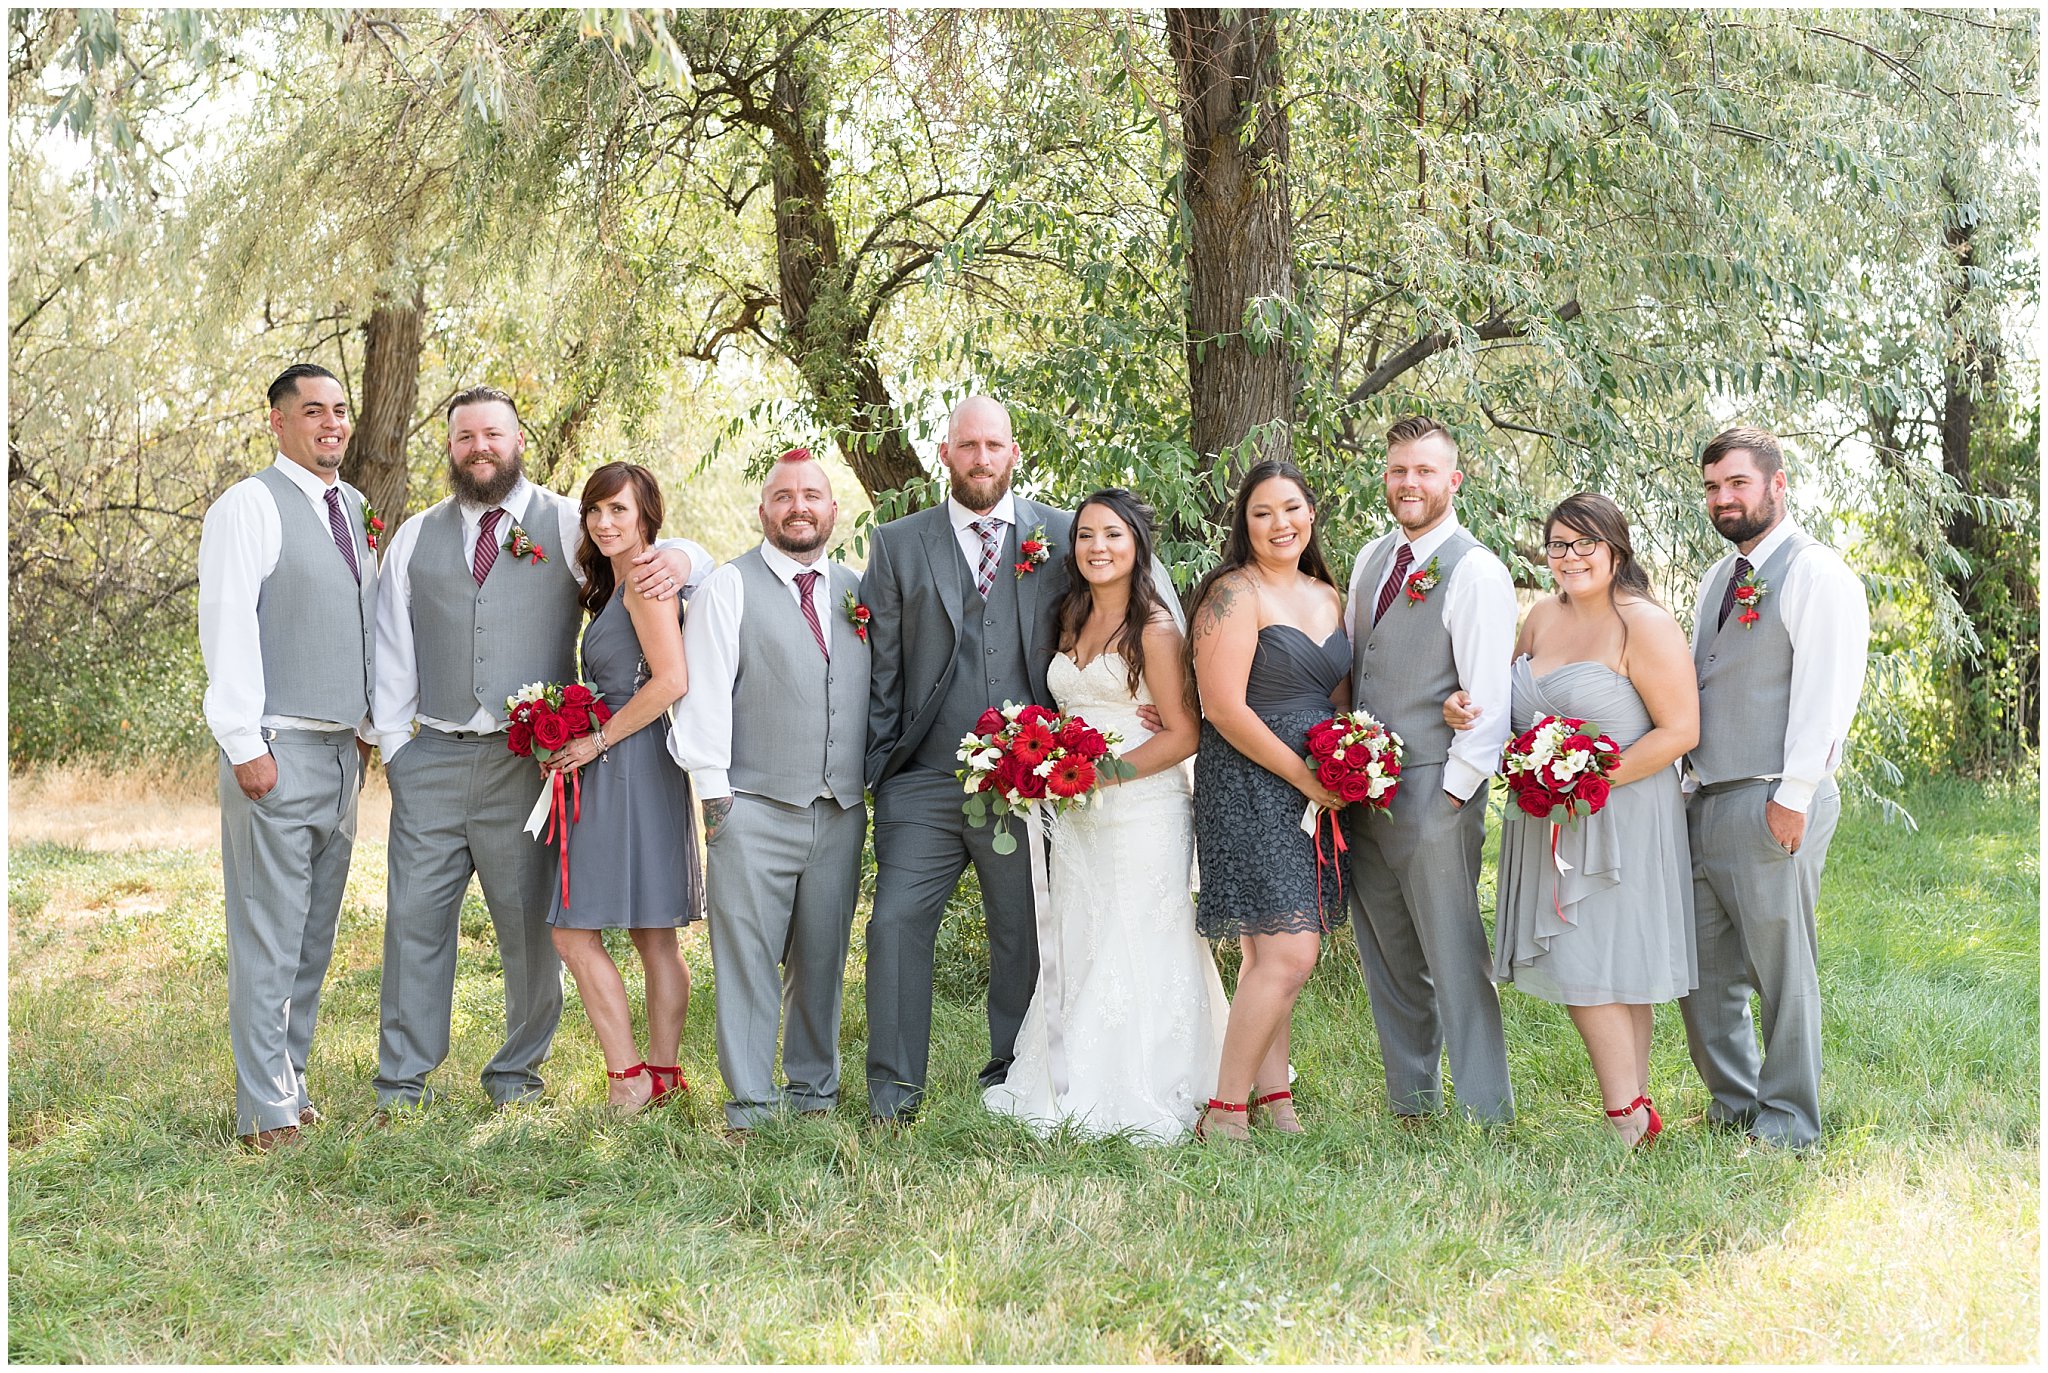 Red and white outdoor wedding bridal party | Davis County Outdoor Wedding | Jessie and Dallin Photography